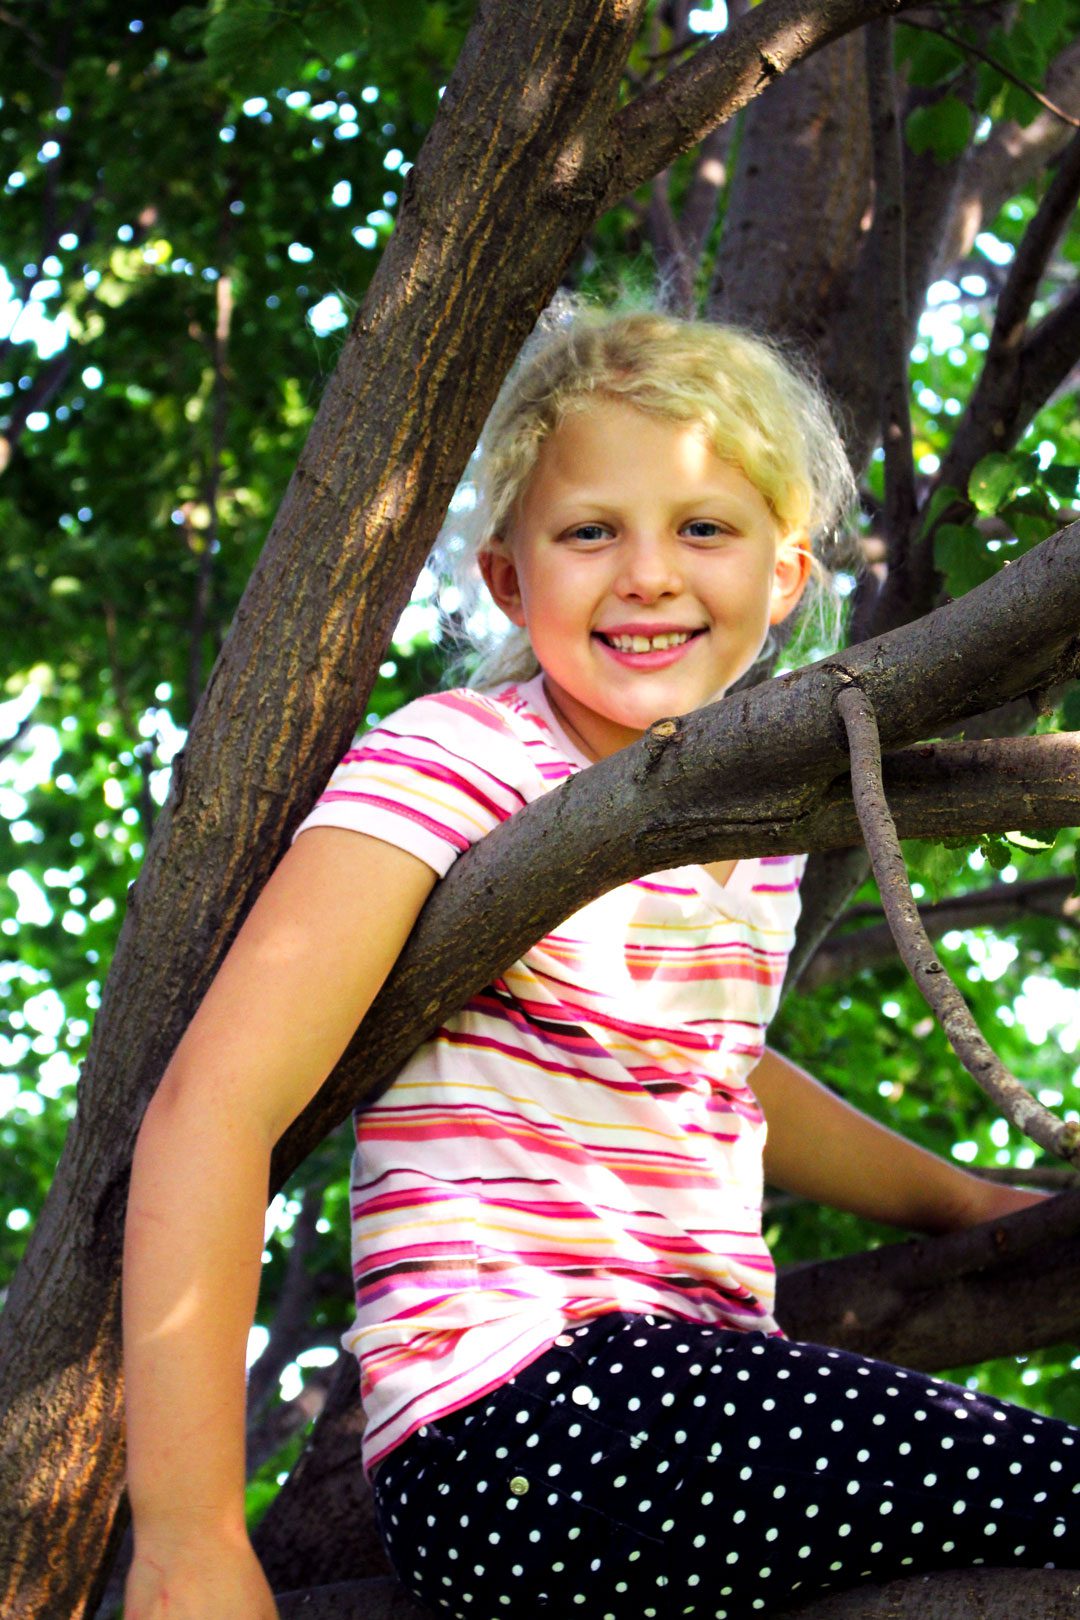 A girl with blonde hair in a striped t-shirt climbing a tree.